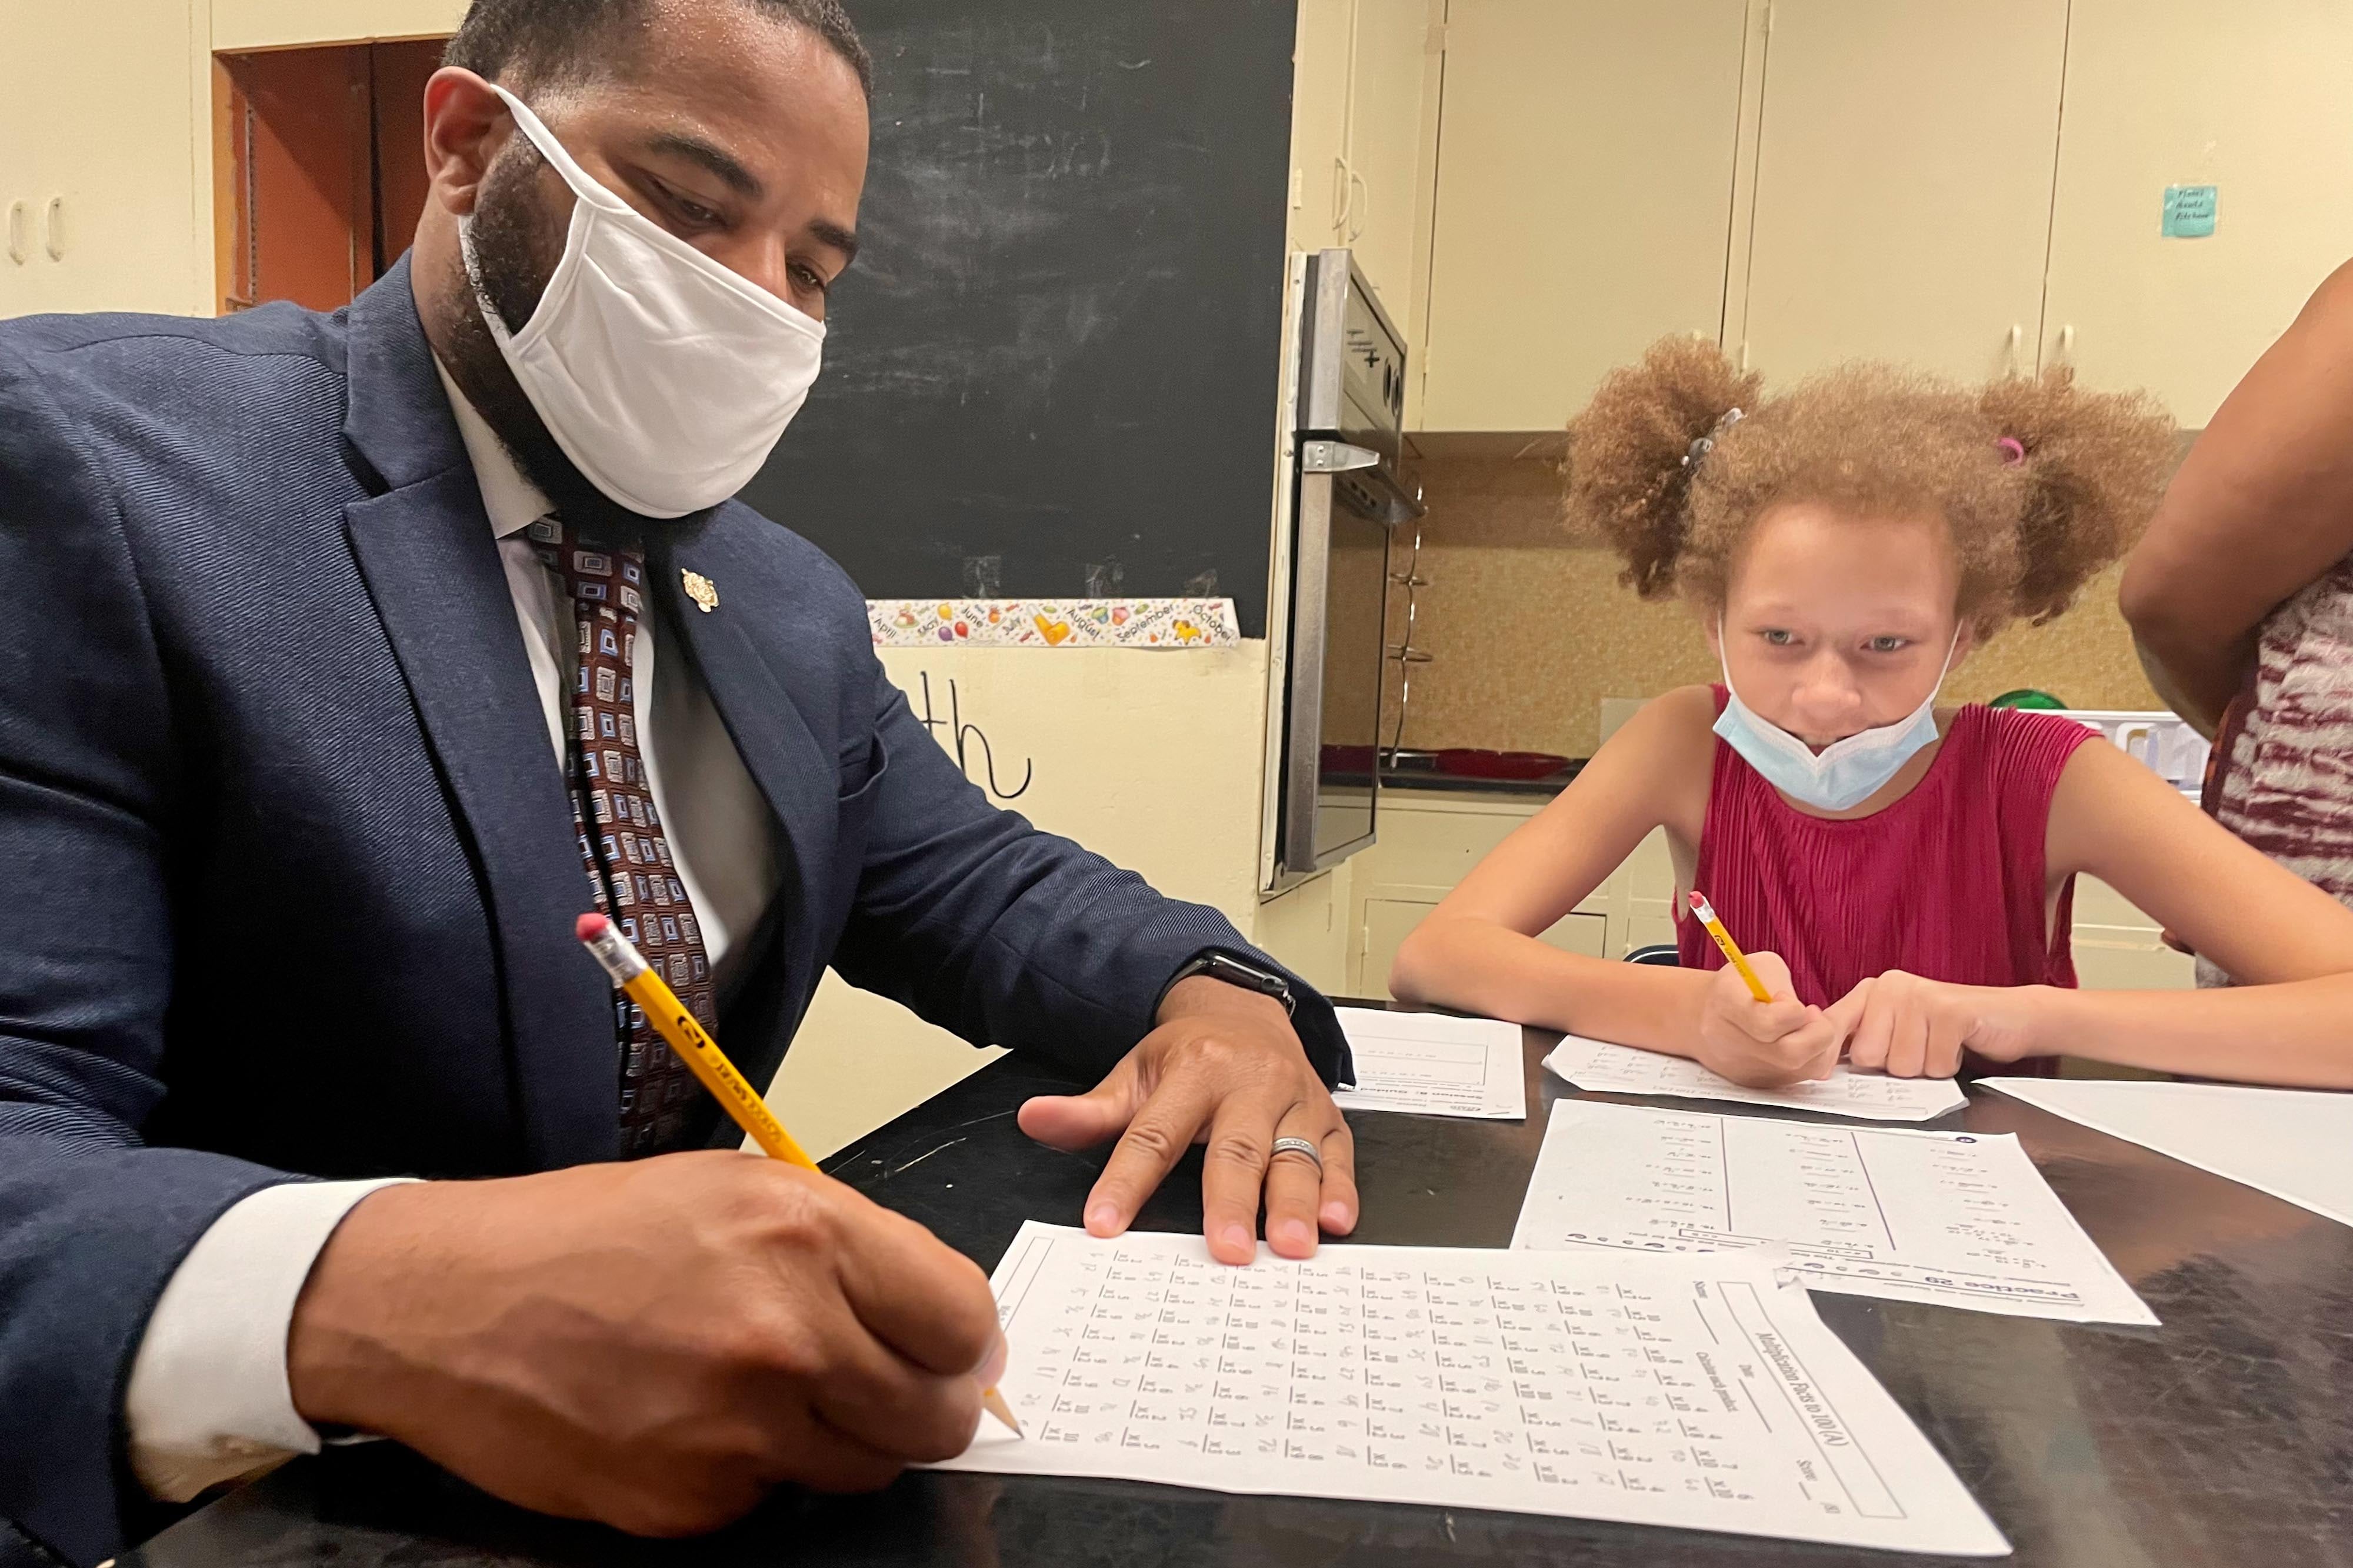 A male school administrator in a suit helps a girl with a multiplication worksheet, sitting with her at a desk. They are both wearing masks to prevent the spread of COVID.